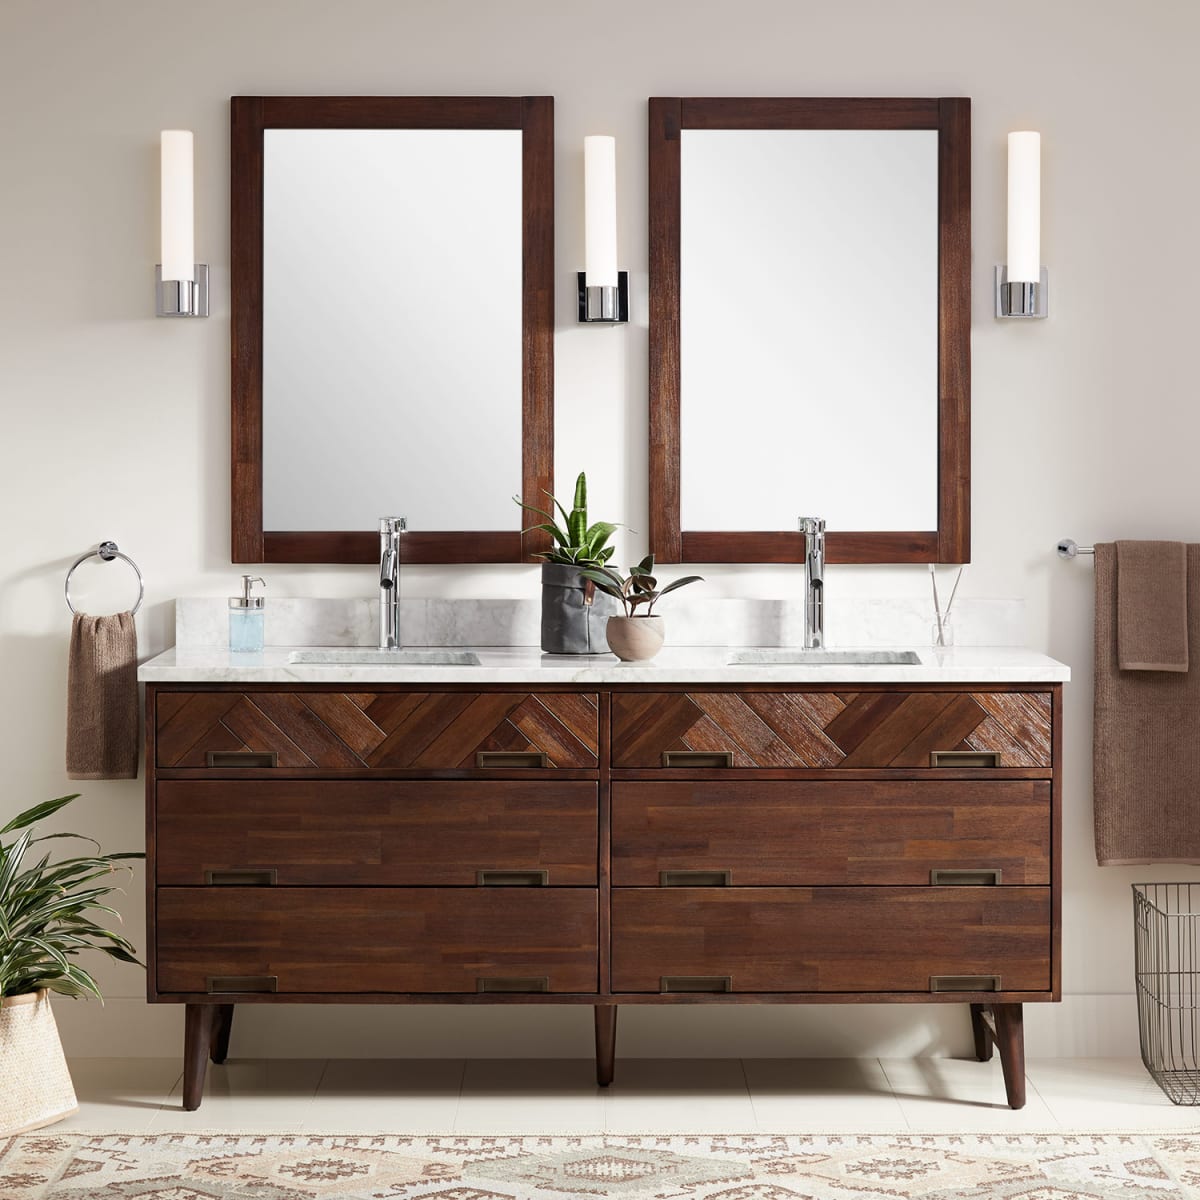 Signature Hardware 447100 Danenberg 72, What Size Mirrors For 72 Inch Vanity